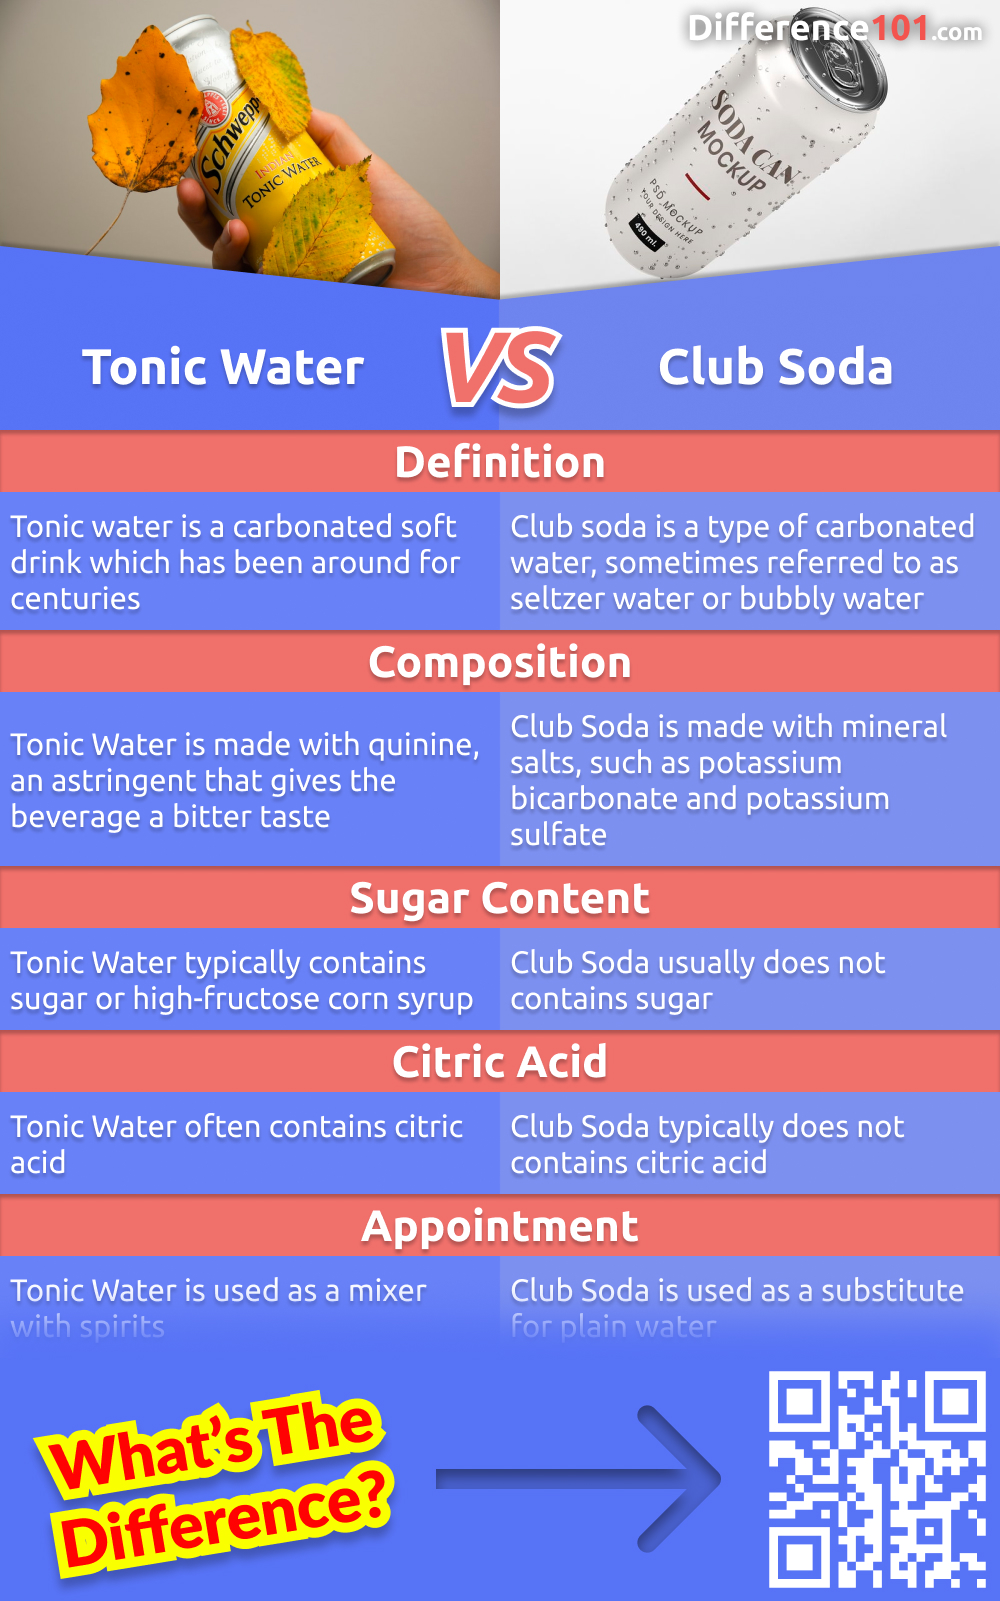 Tonic water and club soda are two of the most popular carbonated drinks. But what are the differences between them? Which one is better for you? Read on to find out the pros, cons of each and their differences.